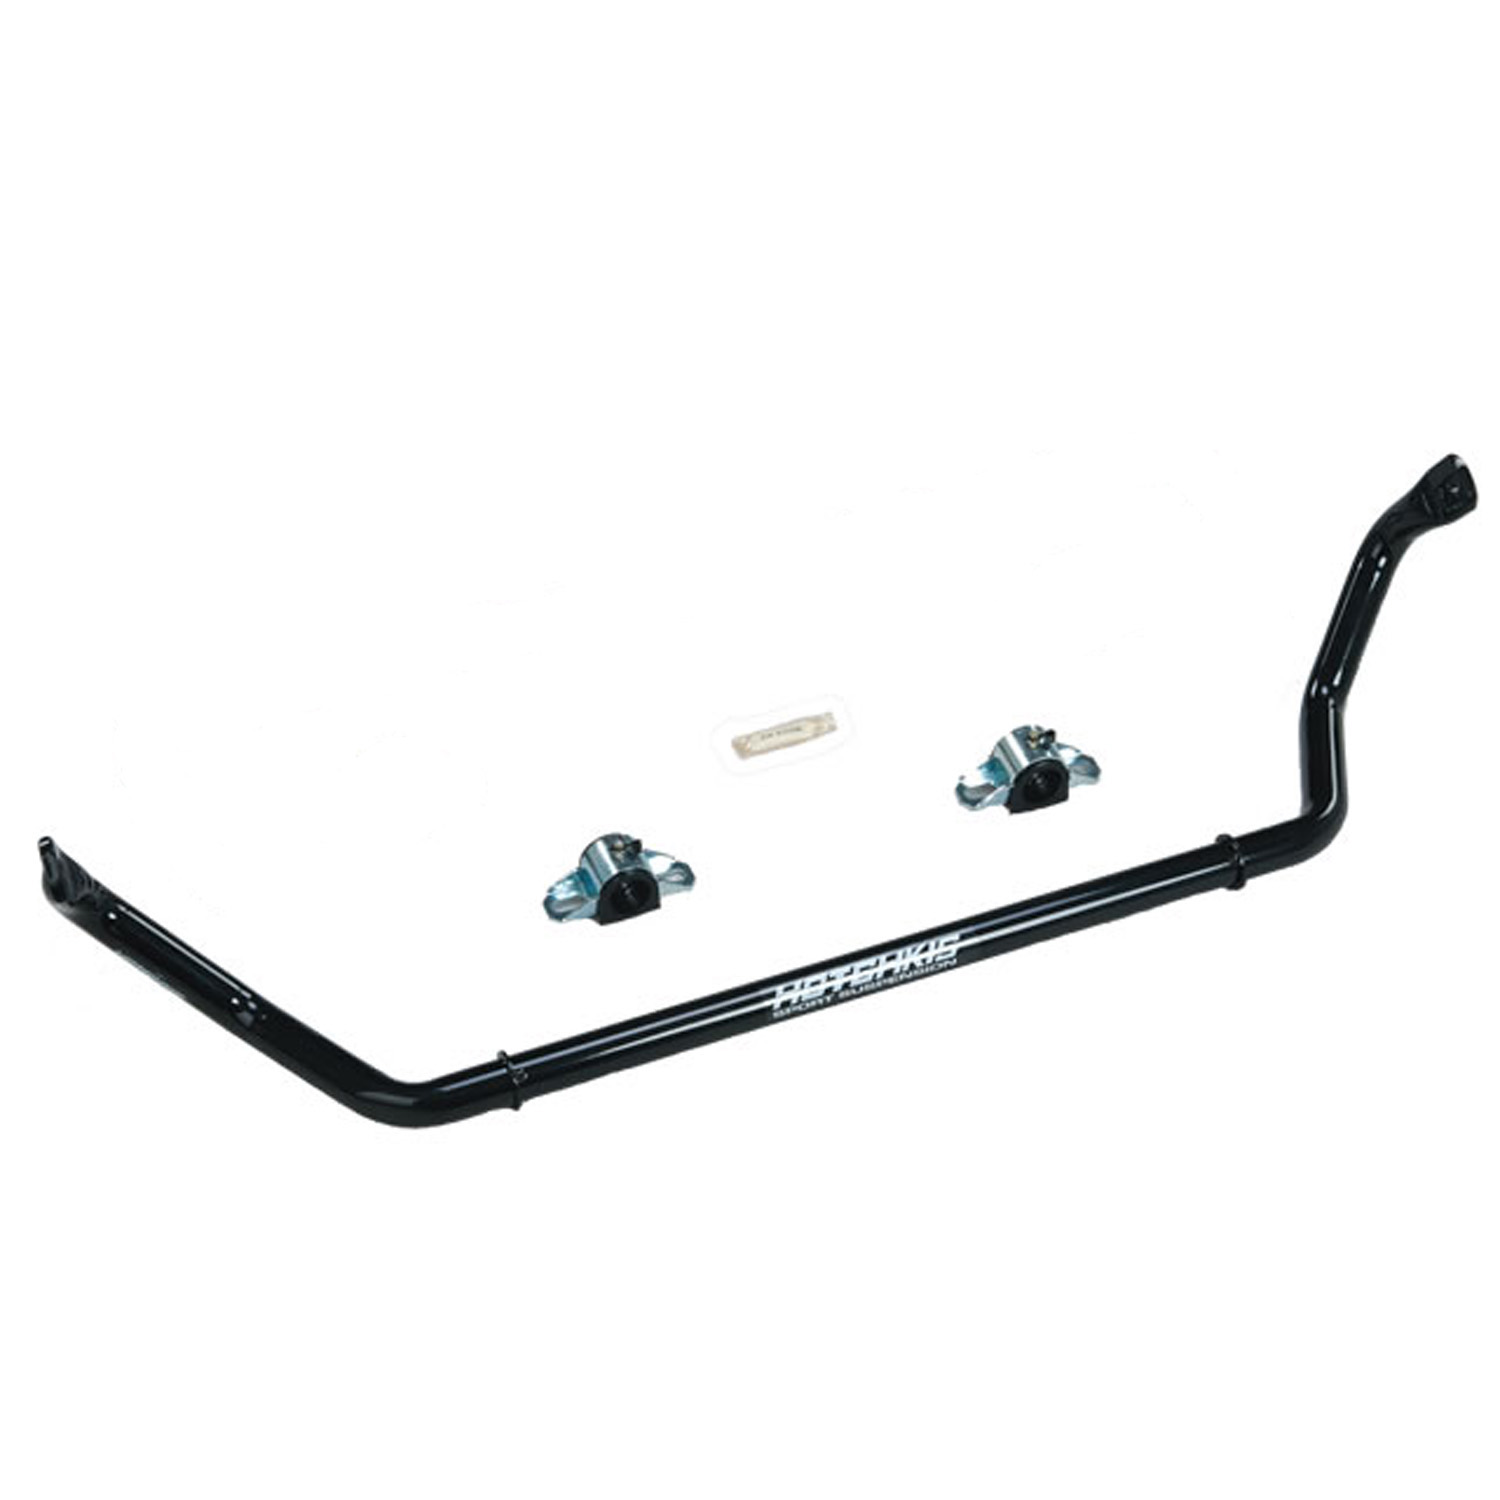 2010-2011 Camaro Front Adjustable Sport Sway Bars from Hotchkis Sport Suspension